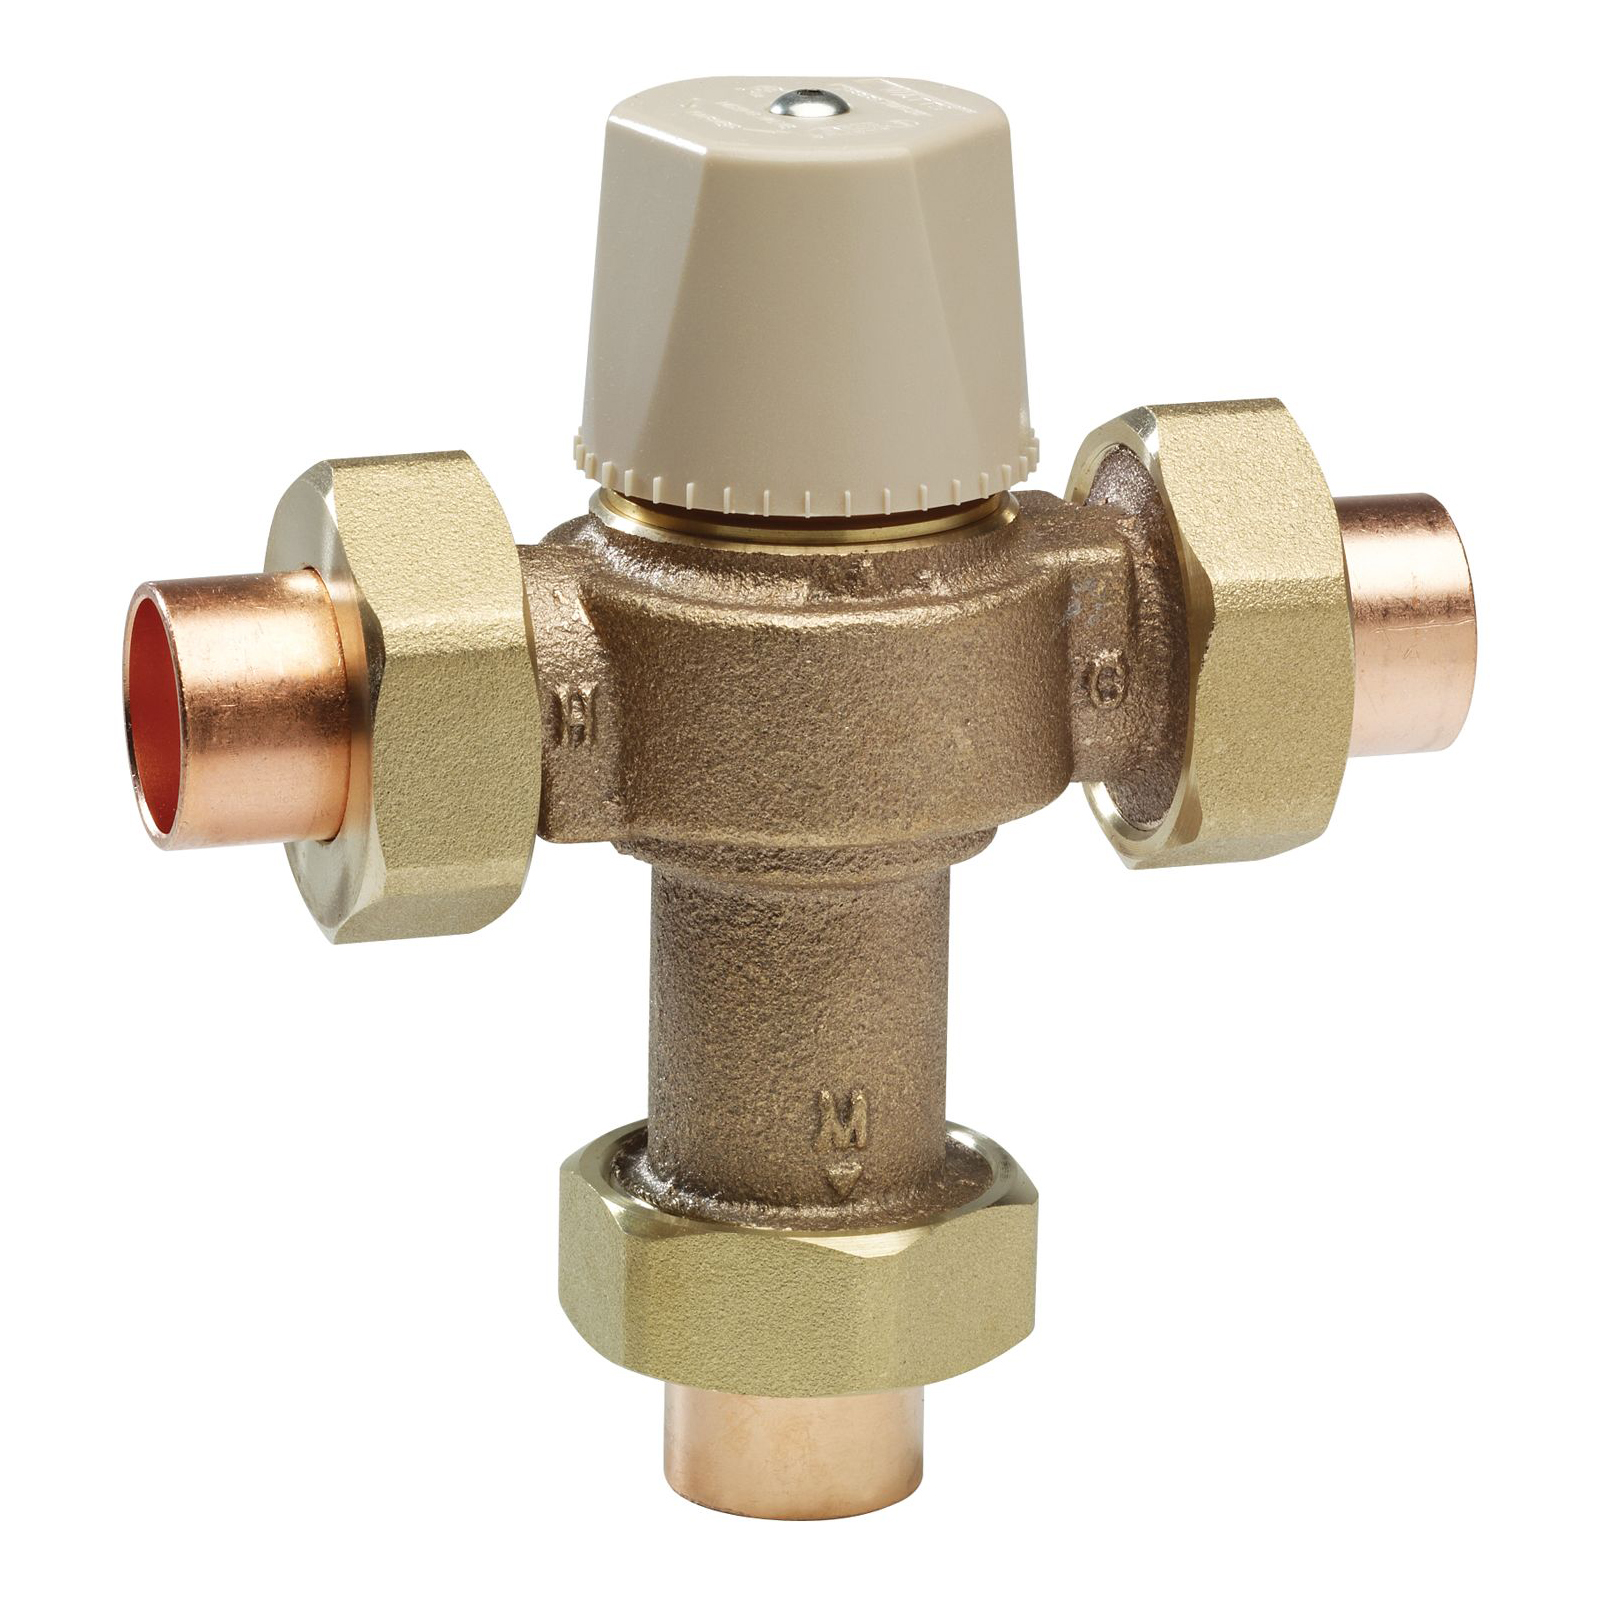 WATTS® 0559118 LFMMVM1-US Thermostatic Mixing Valve, 3/4 in Nominal, Solder End Style, 150 psi Pressure, 0.5 to 20 gpm Flow, Copper Silicon Alloy Body, Domestic